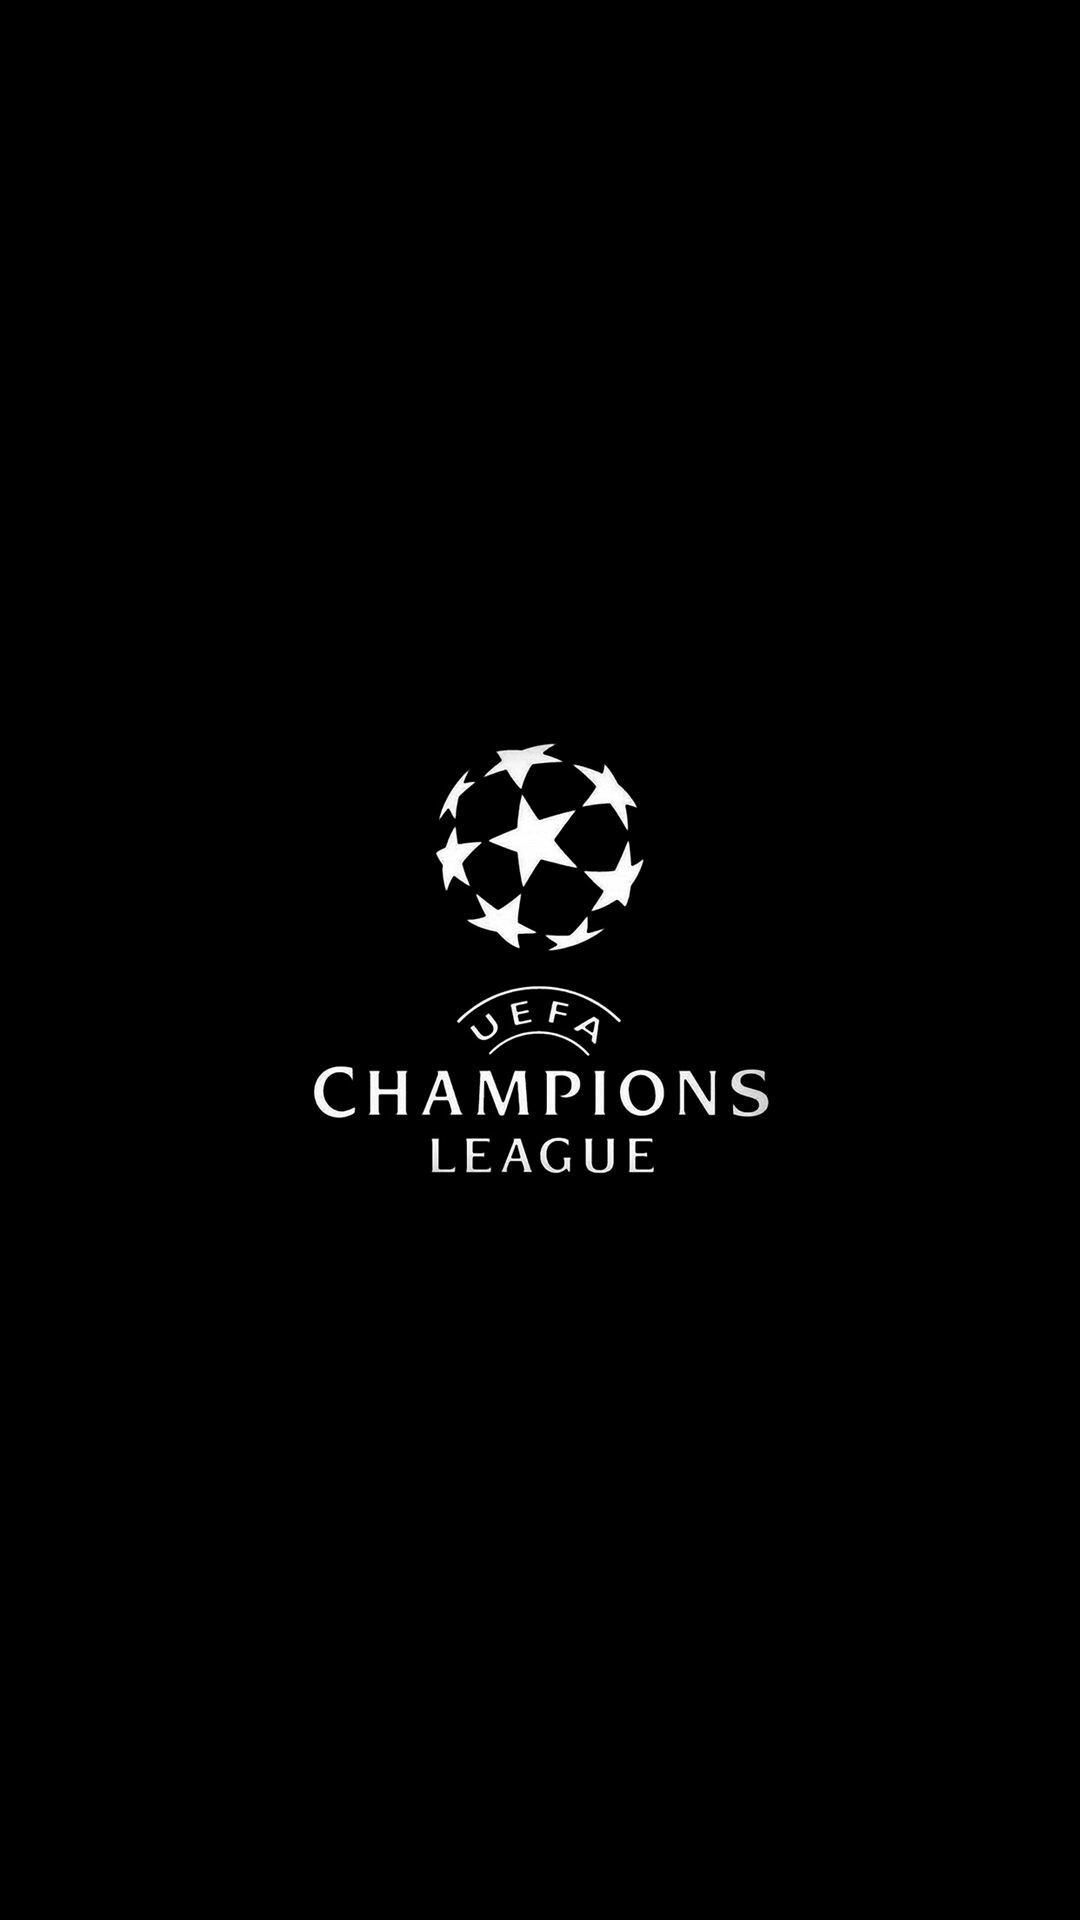 UEFA: The best football club competition in the World, Monochrome. 1080x1920 Full HD Wallpaper.